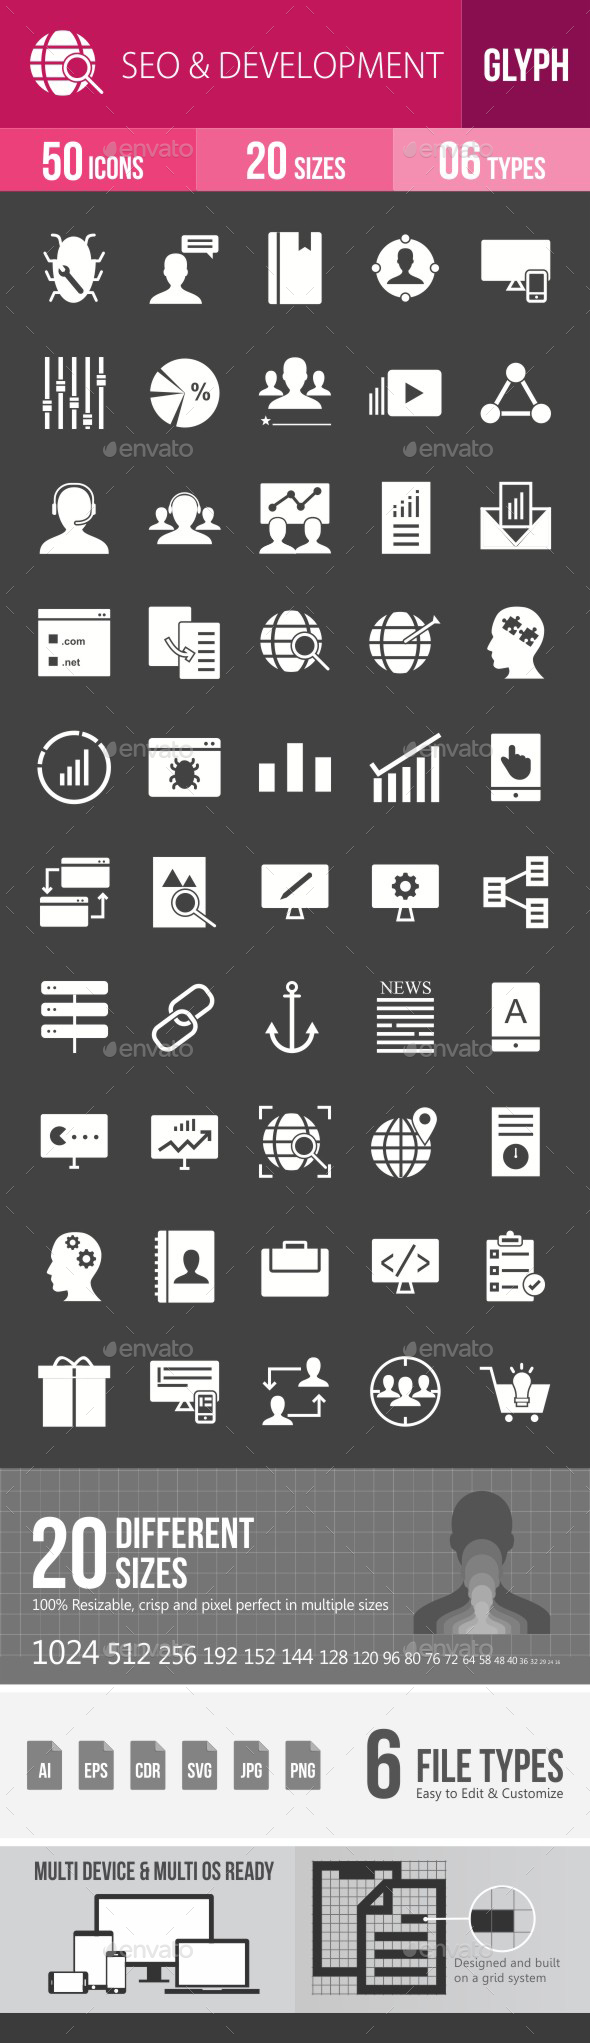 SEO & Development Services Glyph Inverted Icons